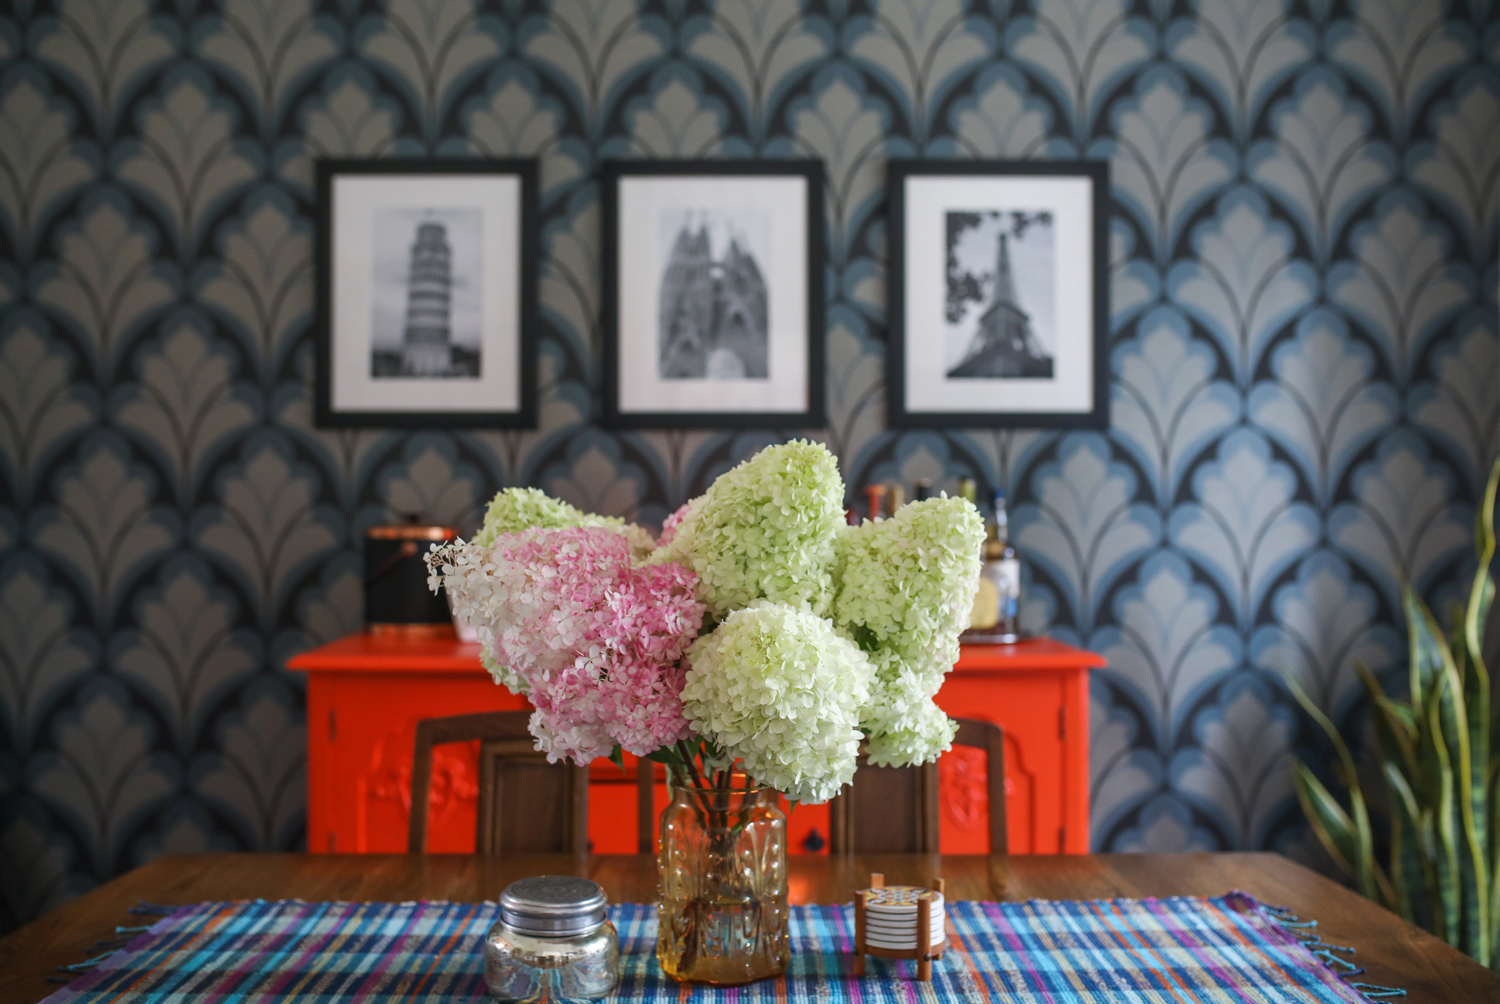 Dining room with patterned wallpaper and floral arrangement